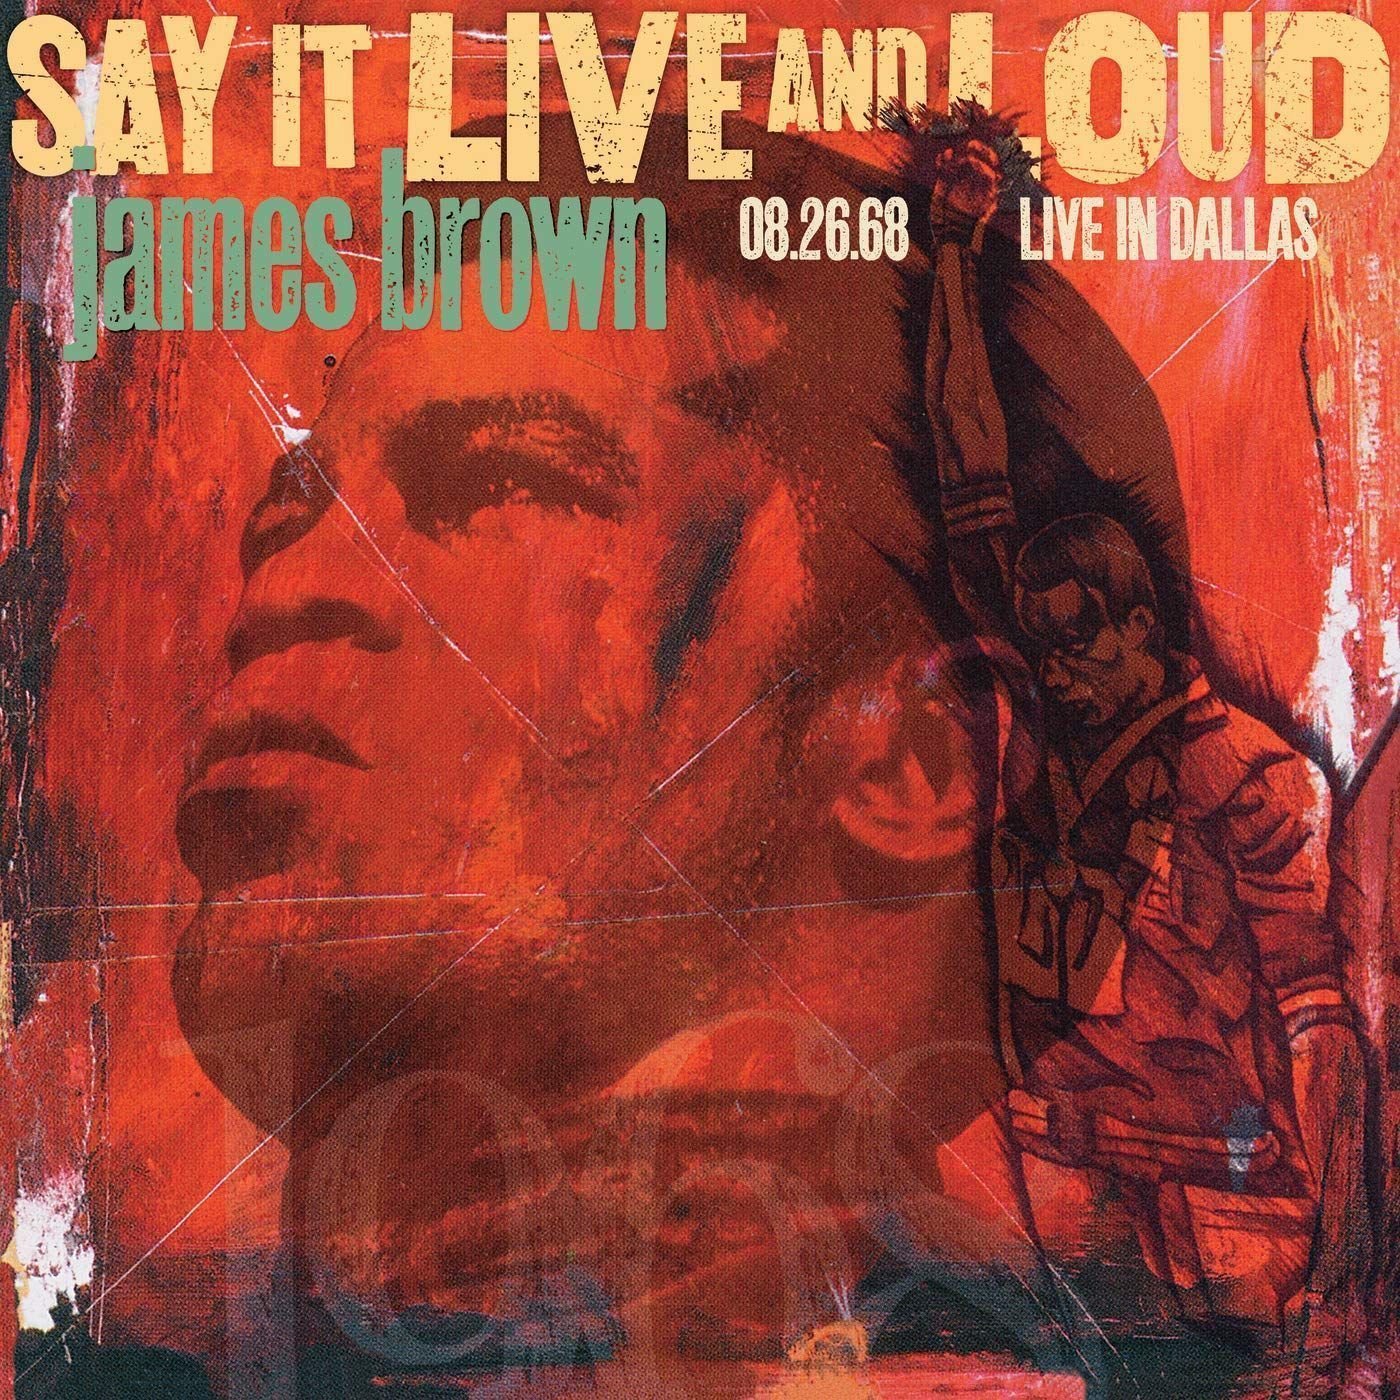 Vinyl Record James Brown - Say It Live And Loud: Live In Dallas 08.26.68 (2 LP)